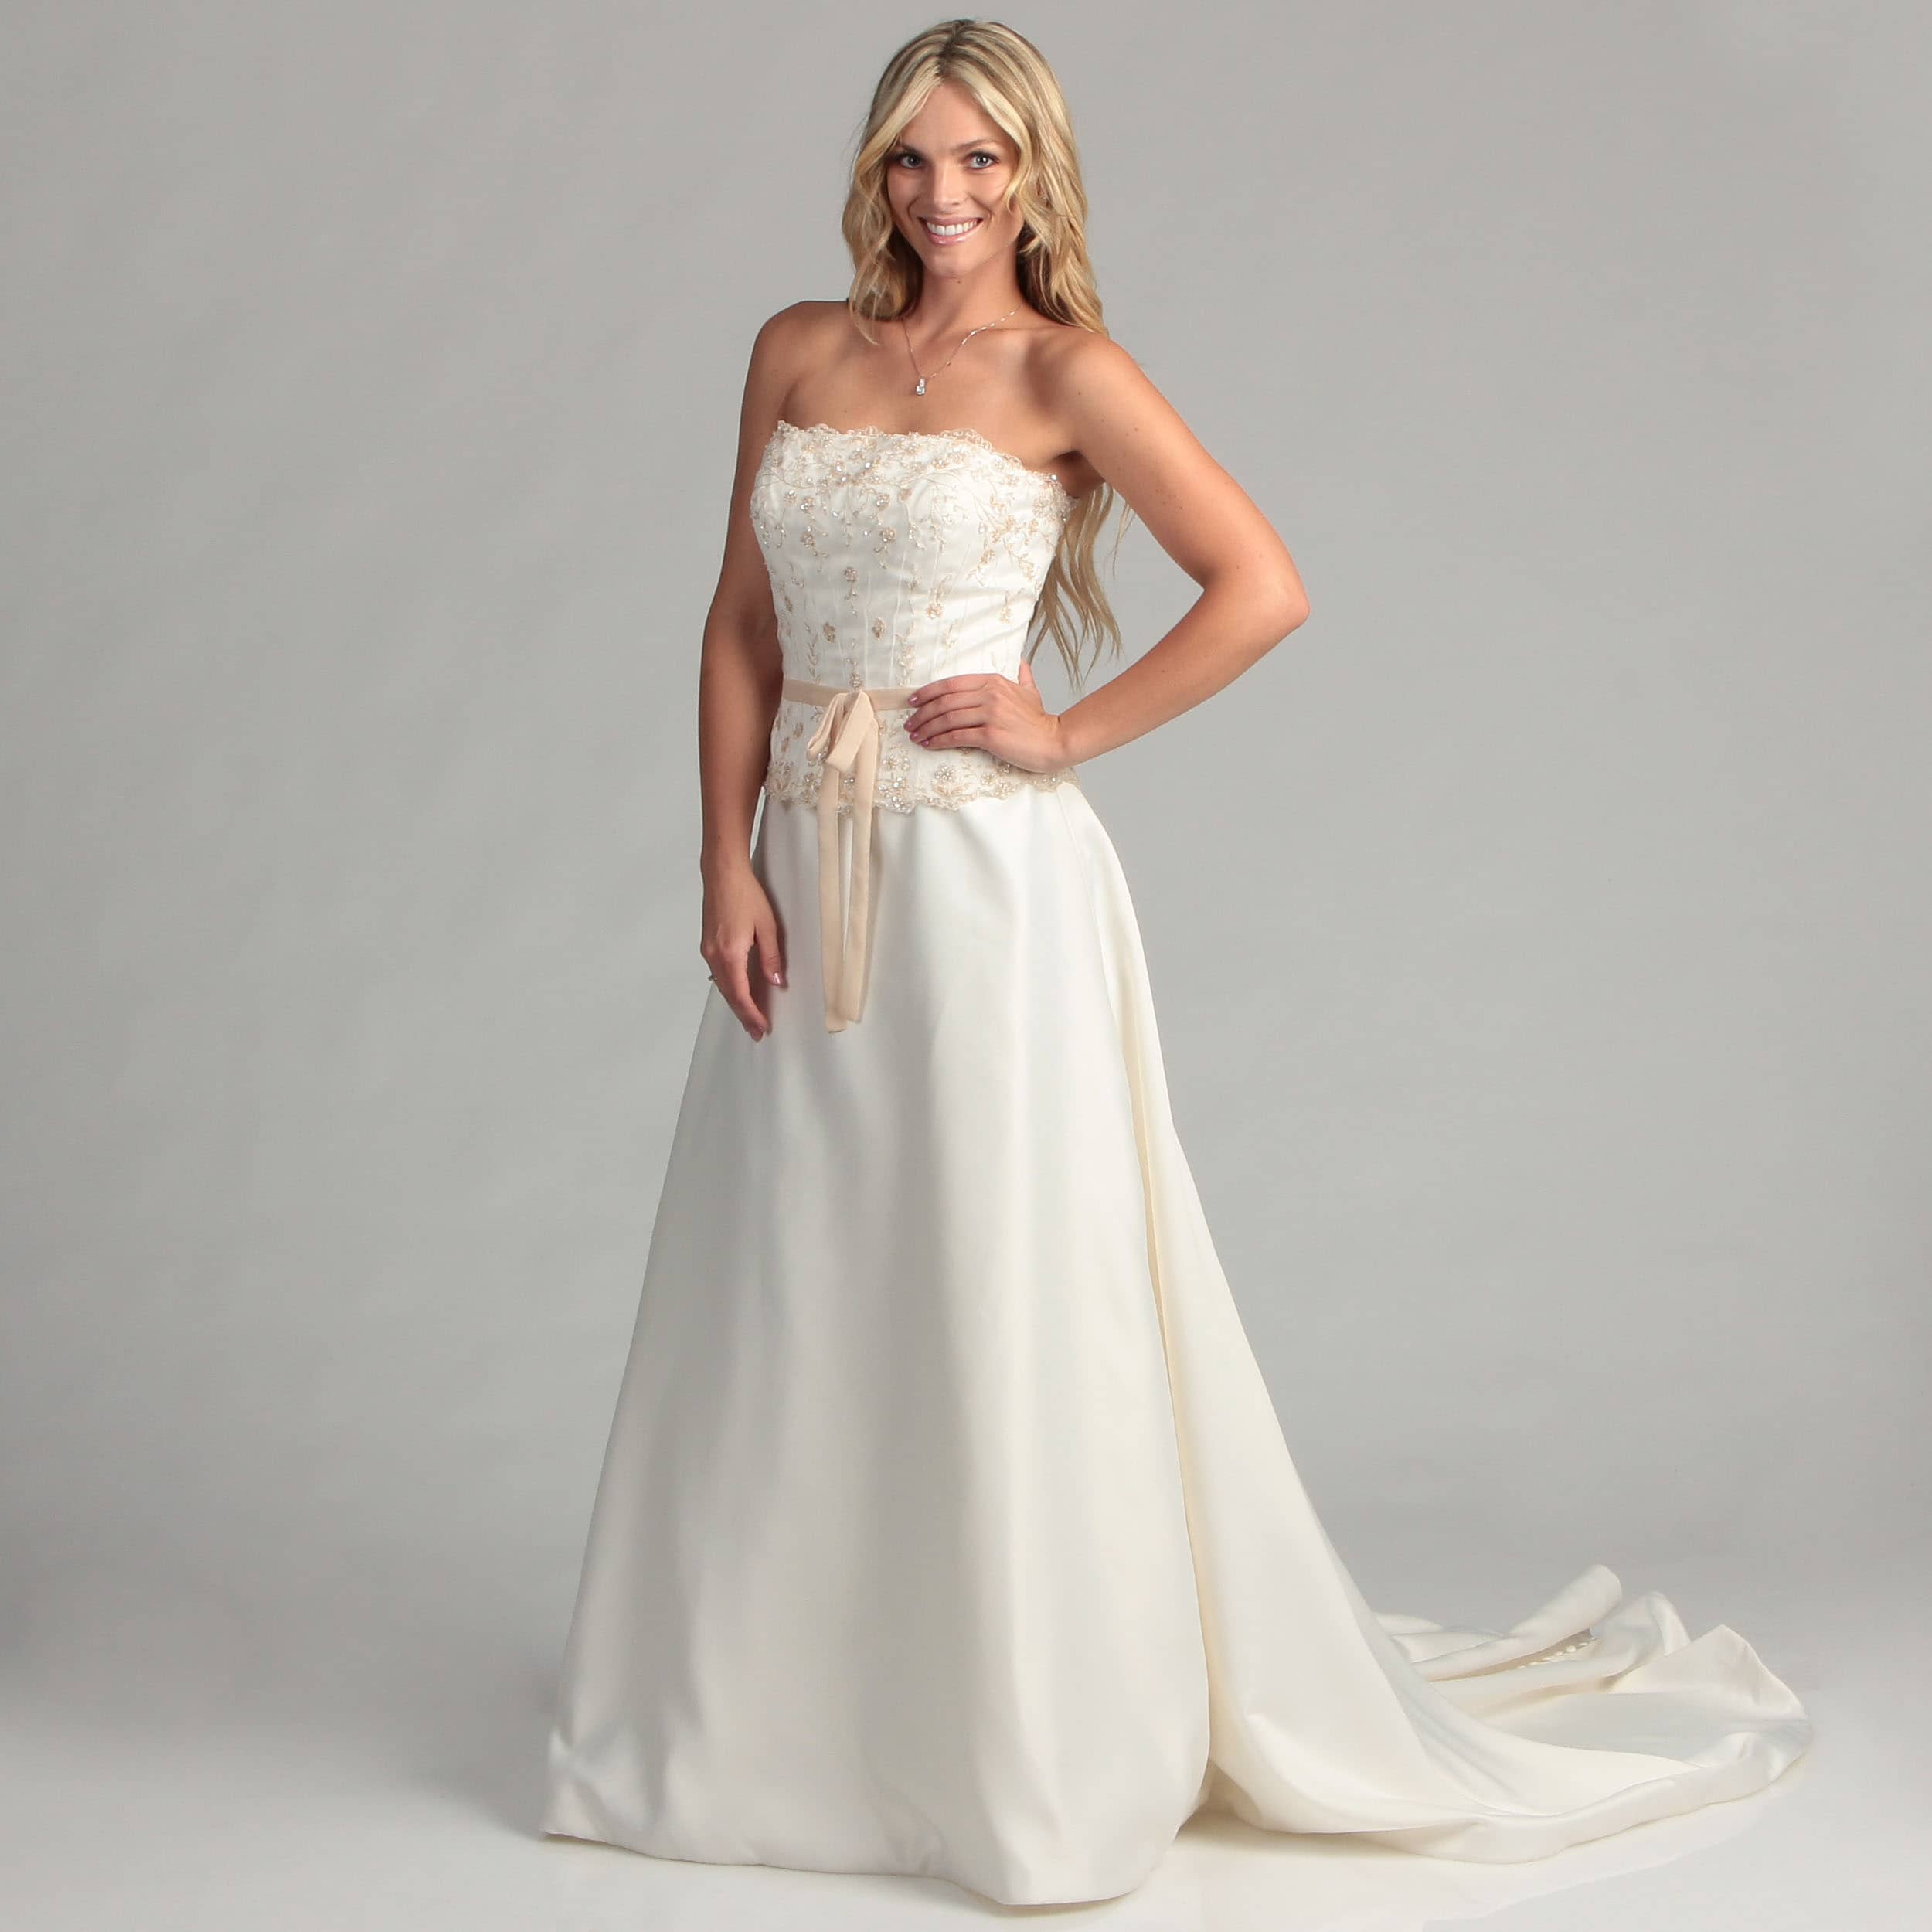 Eden Bridals Womens Ivory Strapless Bridal Dress Today $779.99 Earn